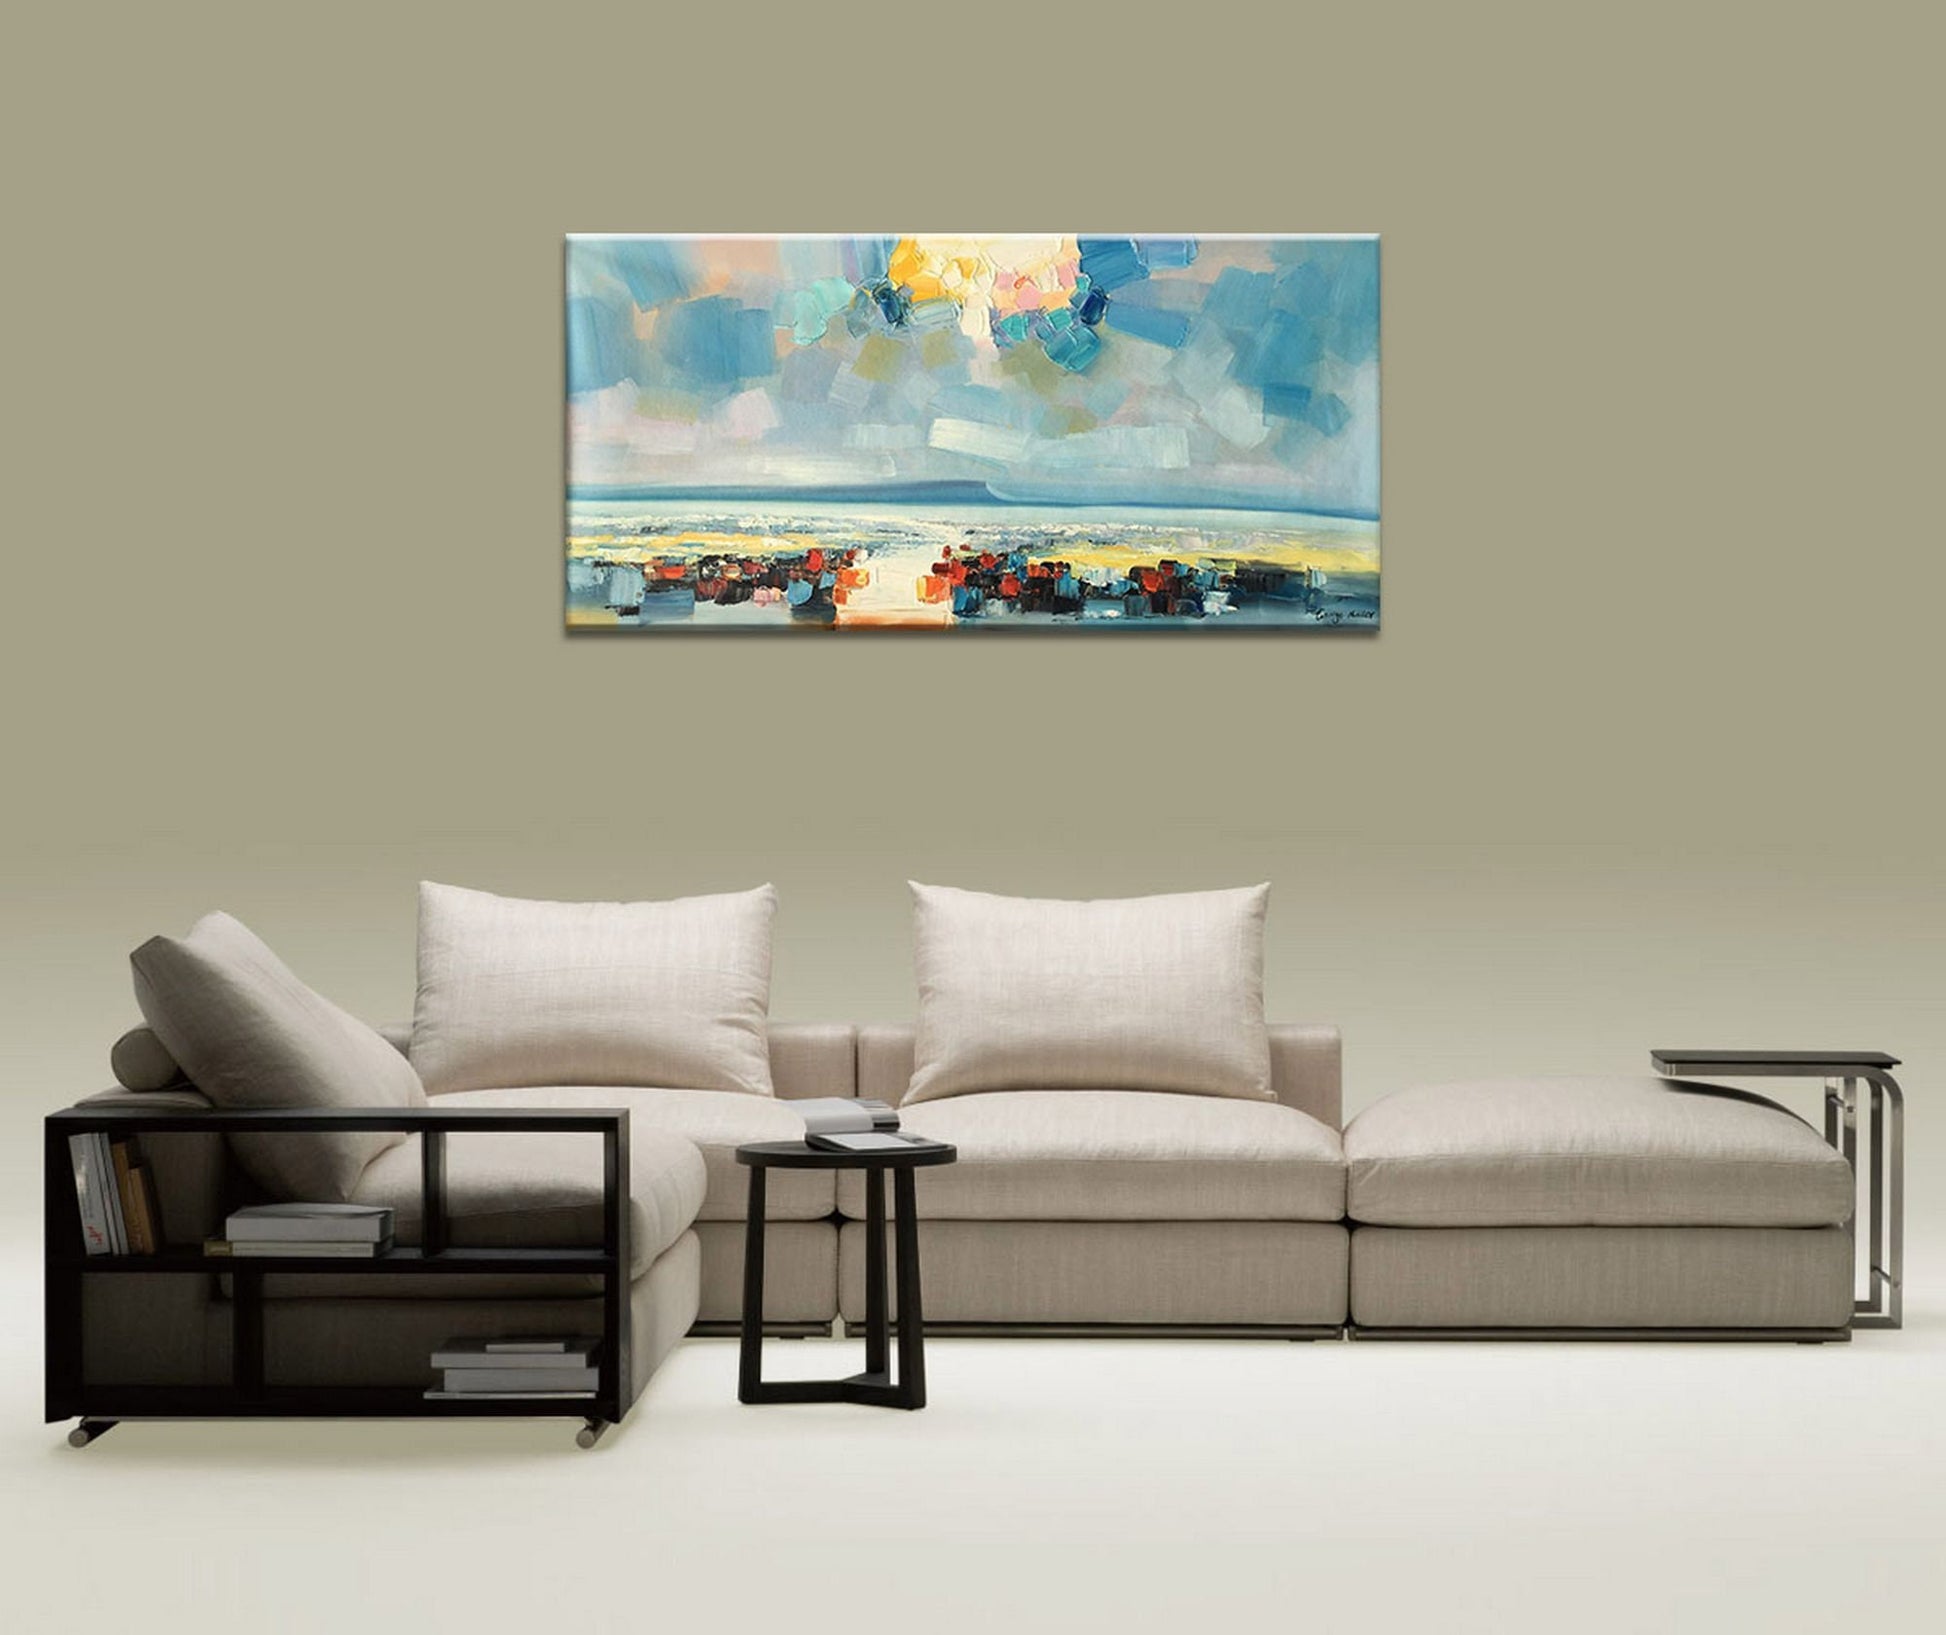 Original Painting, Large Abstract Painting, Canvas Art, Living Room Art, Modern Art, Modern Wall Art, Landscape Painting, Oil Painting